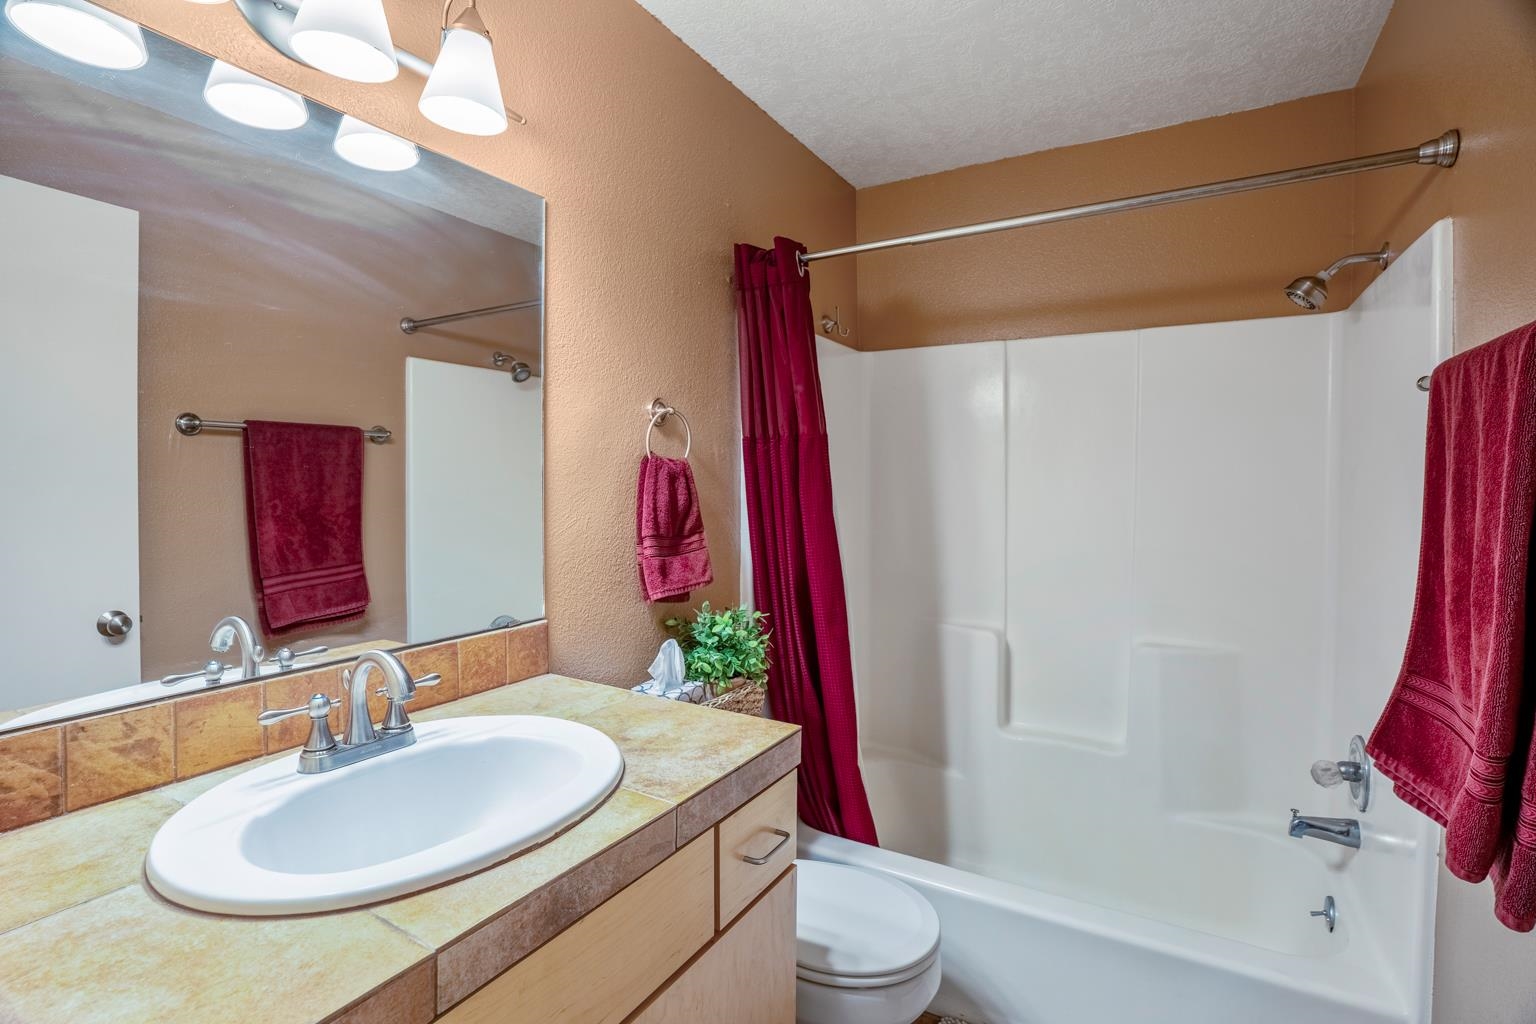 941 Calle Mejia Unit 331, Santa Fe, New Mexico 87501, 1 Bedroom Bedrooms, ,1 BathroomBathrooms,Residential,For Sale,941 Calle Mejia Unit 331,202201742